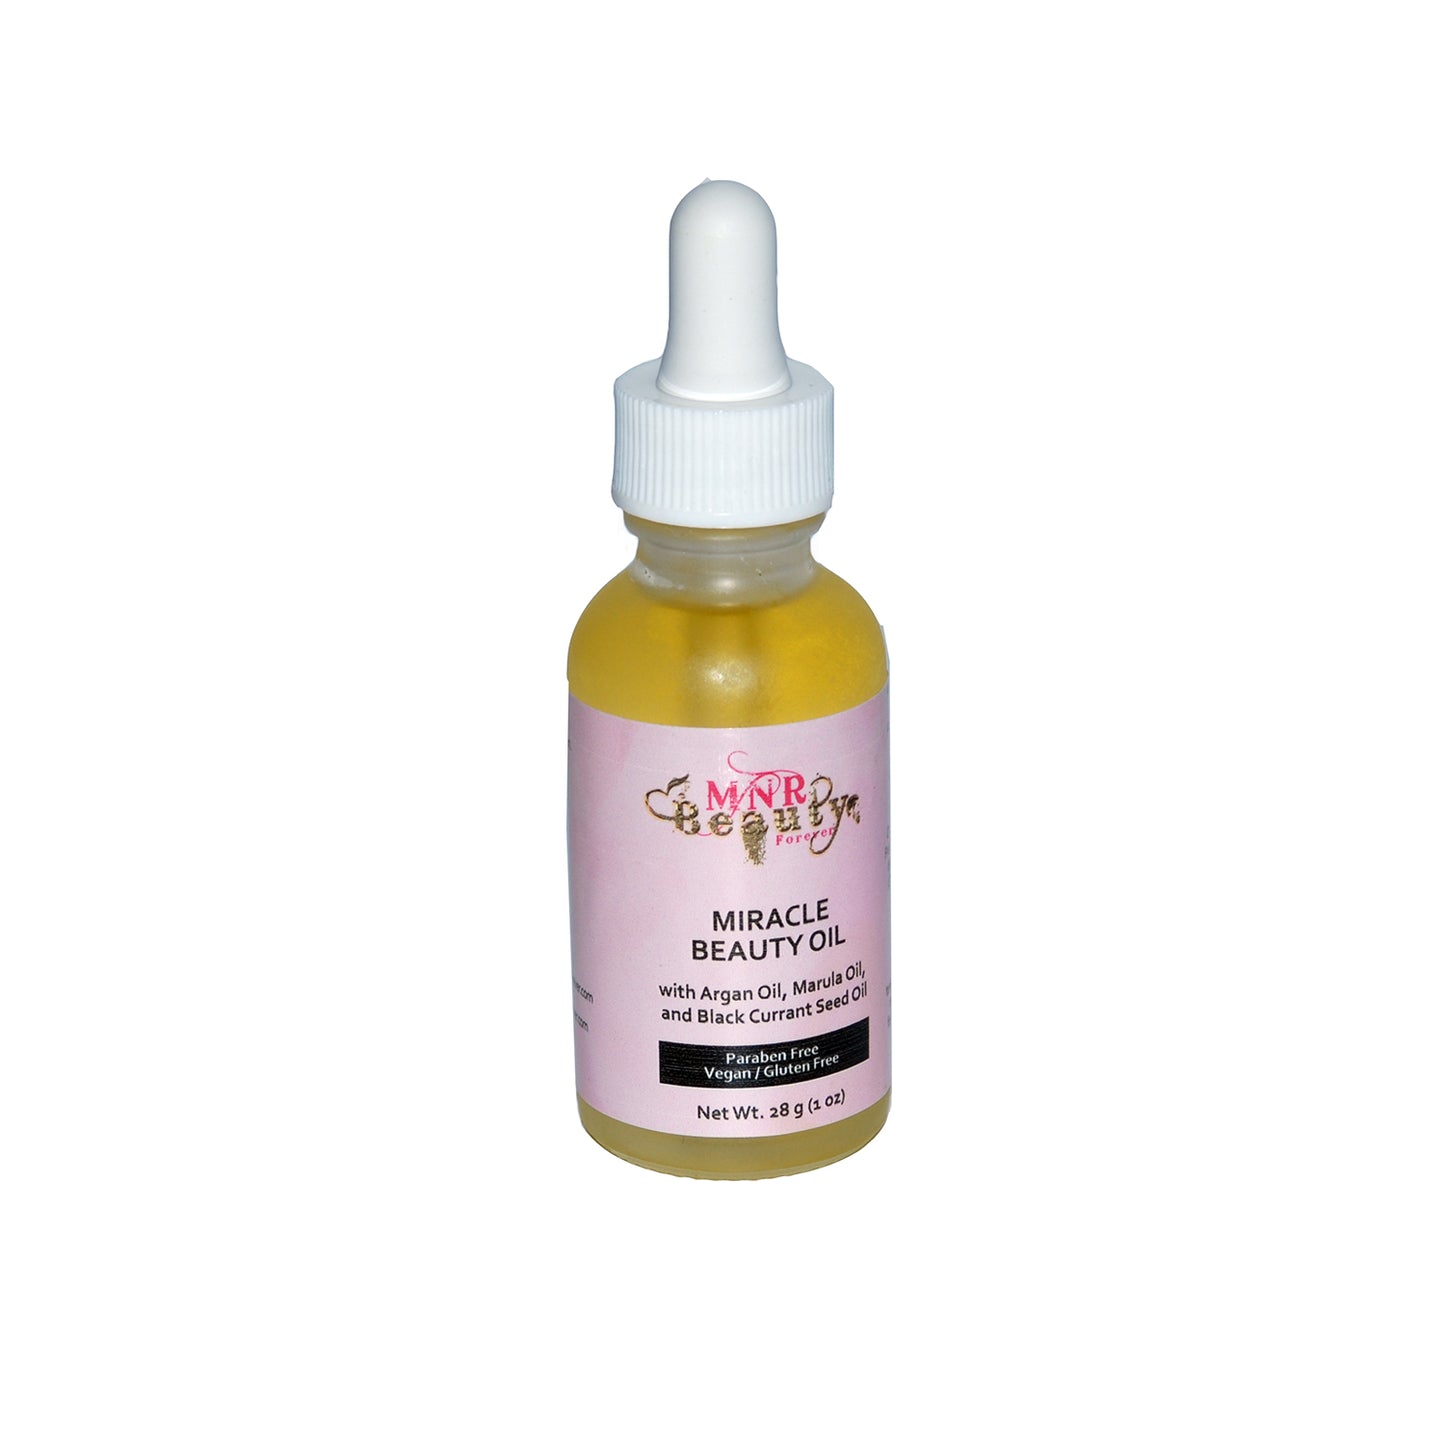 MIRACLE BEAUTY OIL